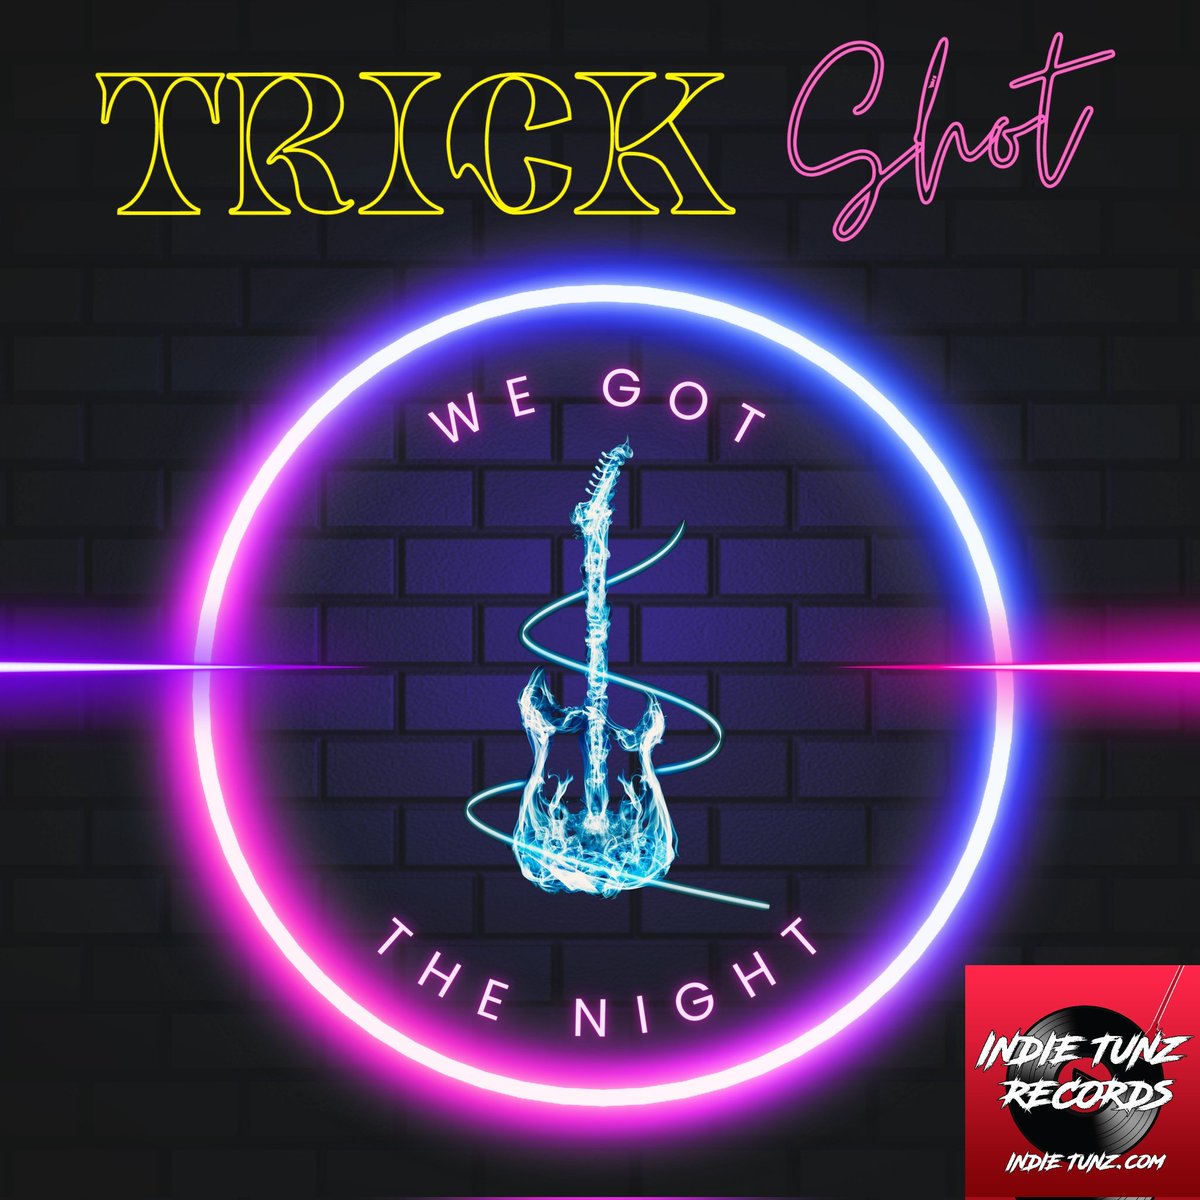 MM Radio bringing you 100% pure eargasm with Trick Shot - We Got The Night 💥 Listen here on mm-radio.com @trick_shot_band